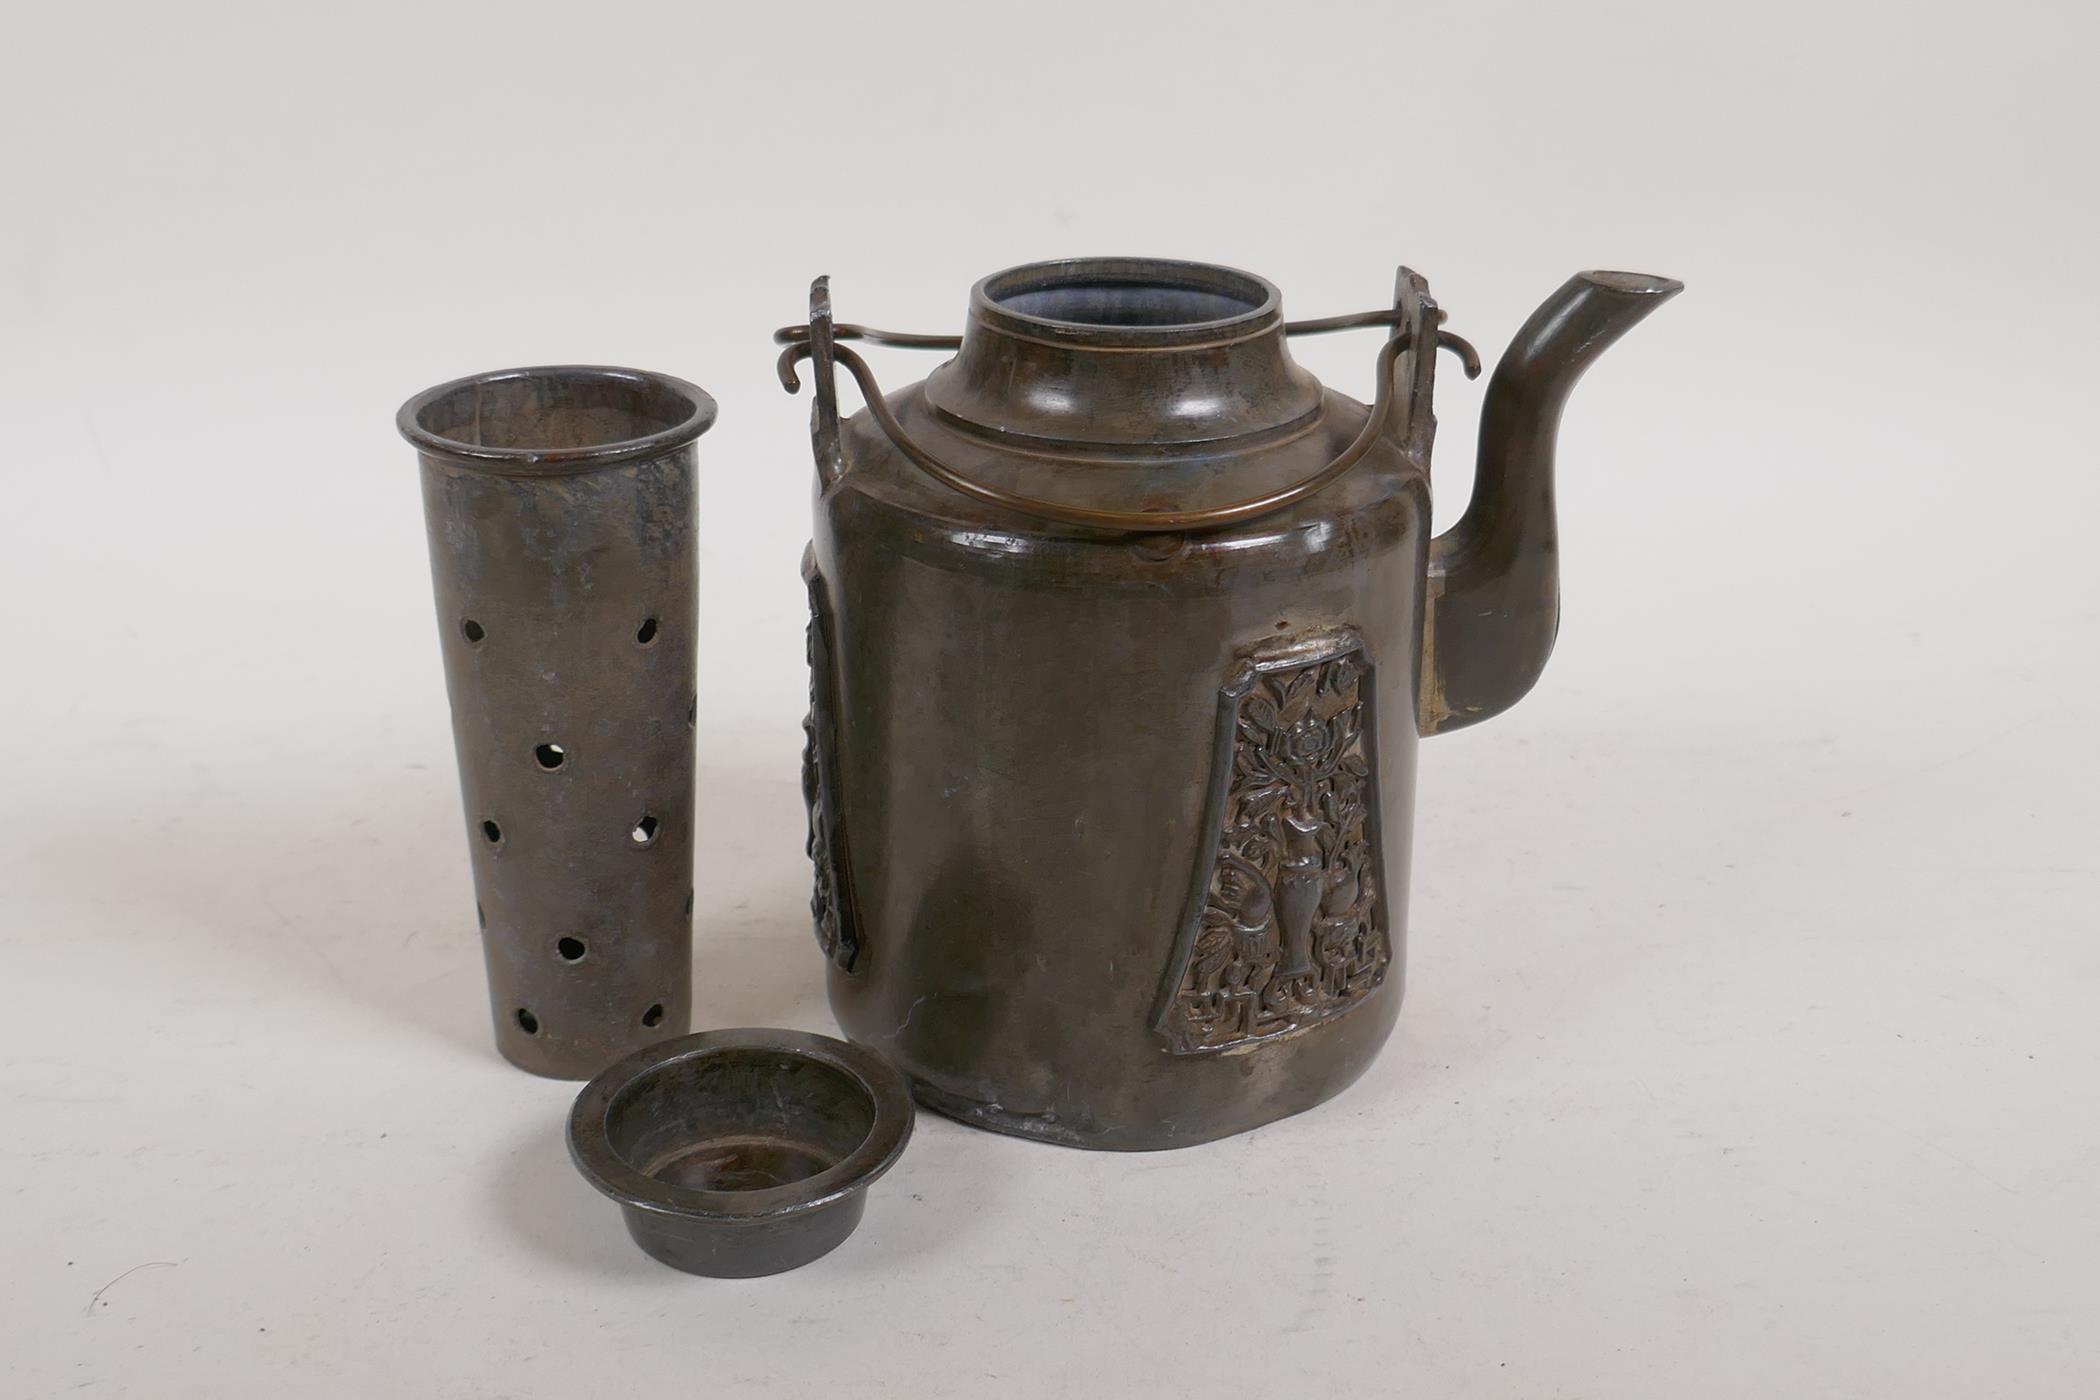 An antique Chinese pewter tea pot with applied decorative panels in relief and removable infuser/ - Image 4 of 6